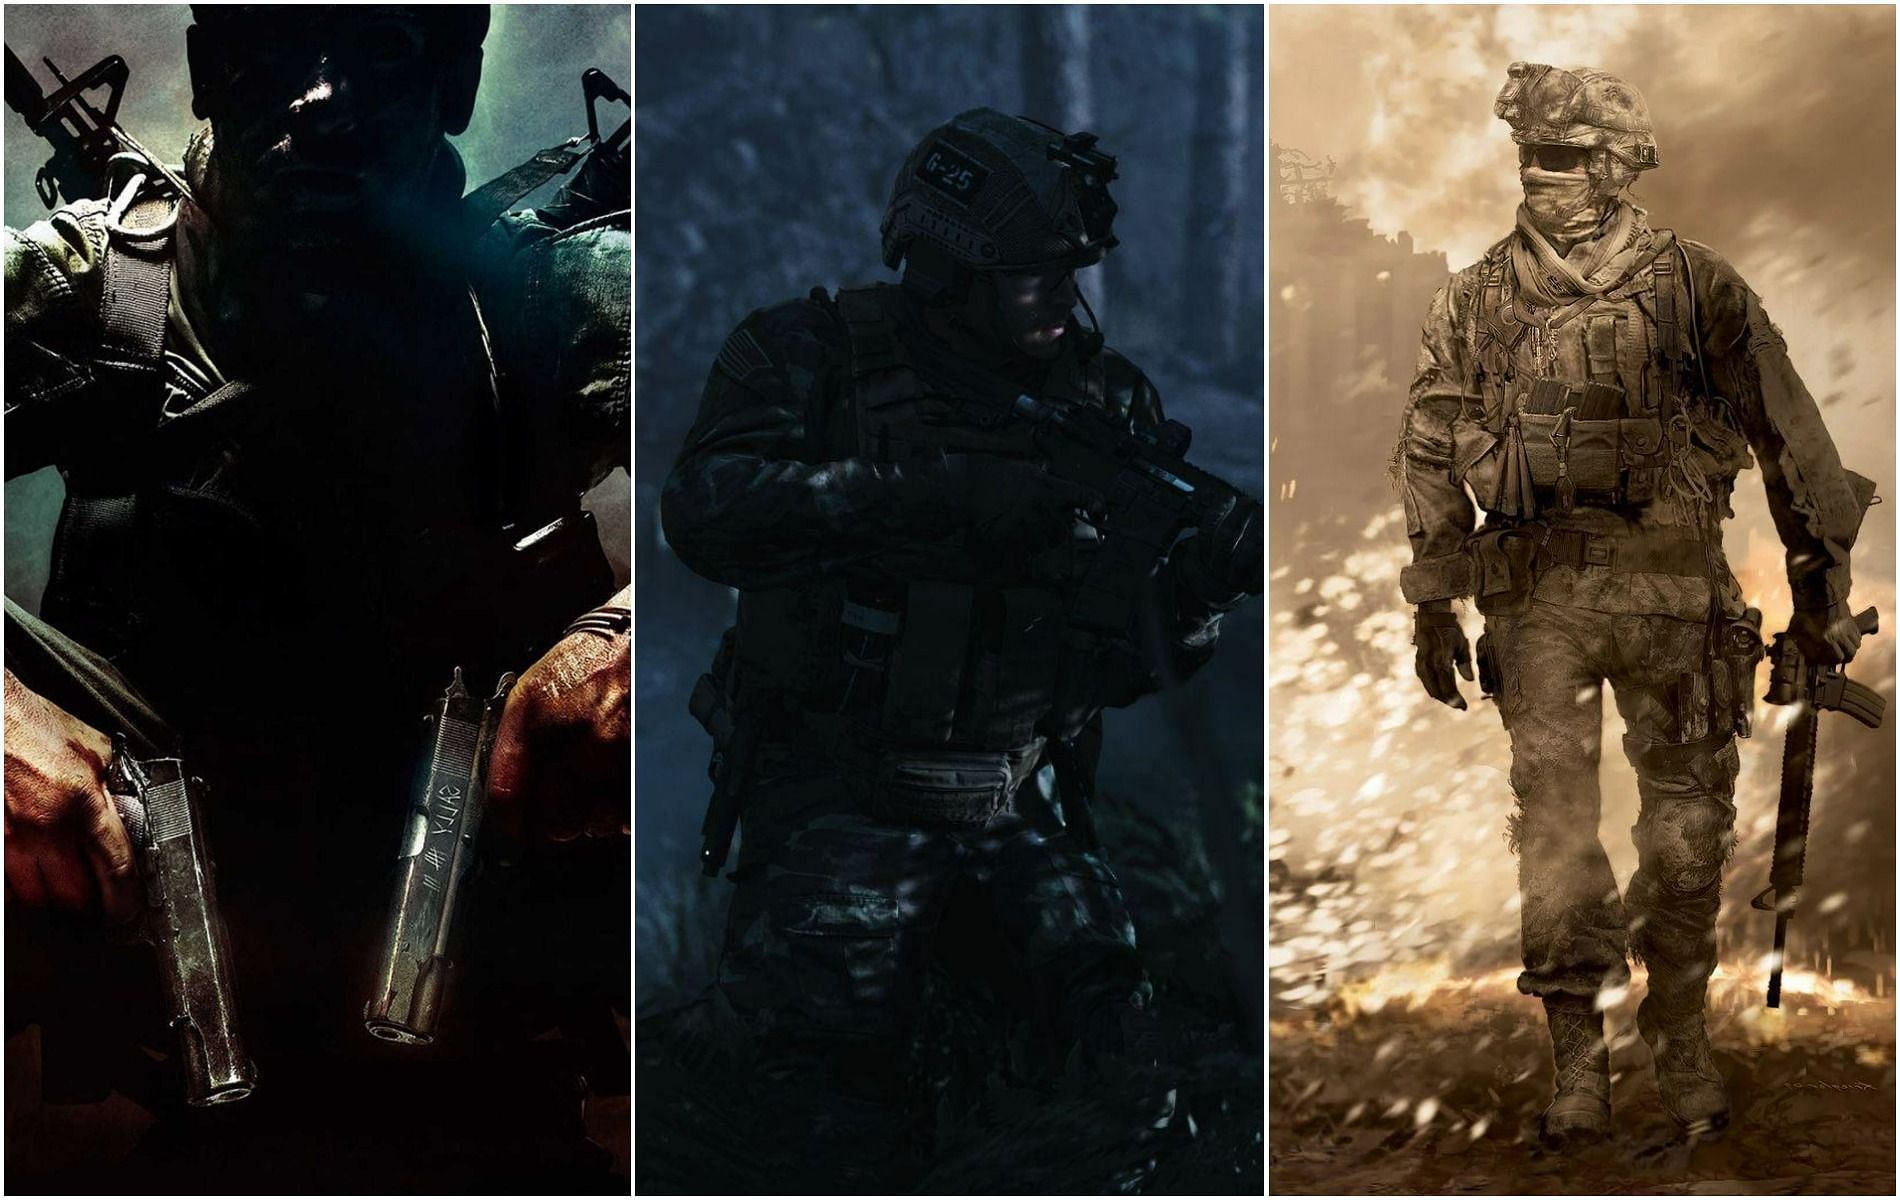 Some Call of Duty campaigns just hit harder (Image via Activision)